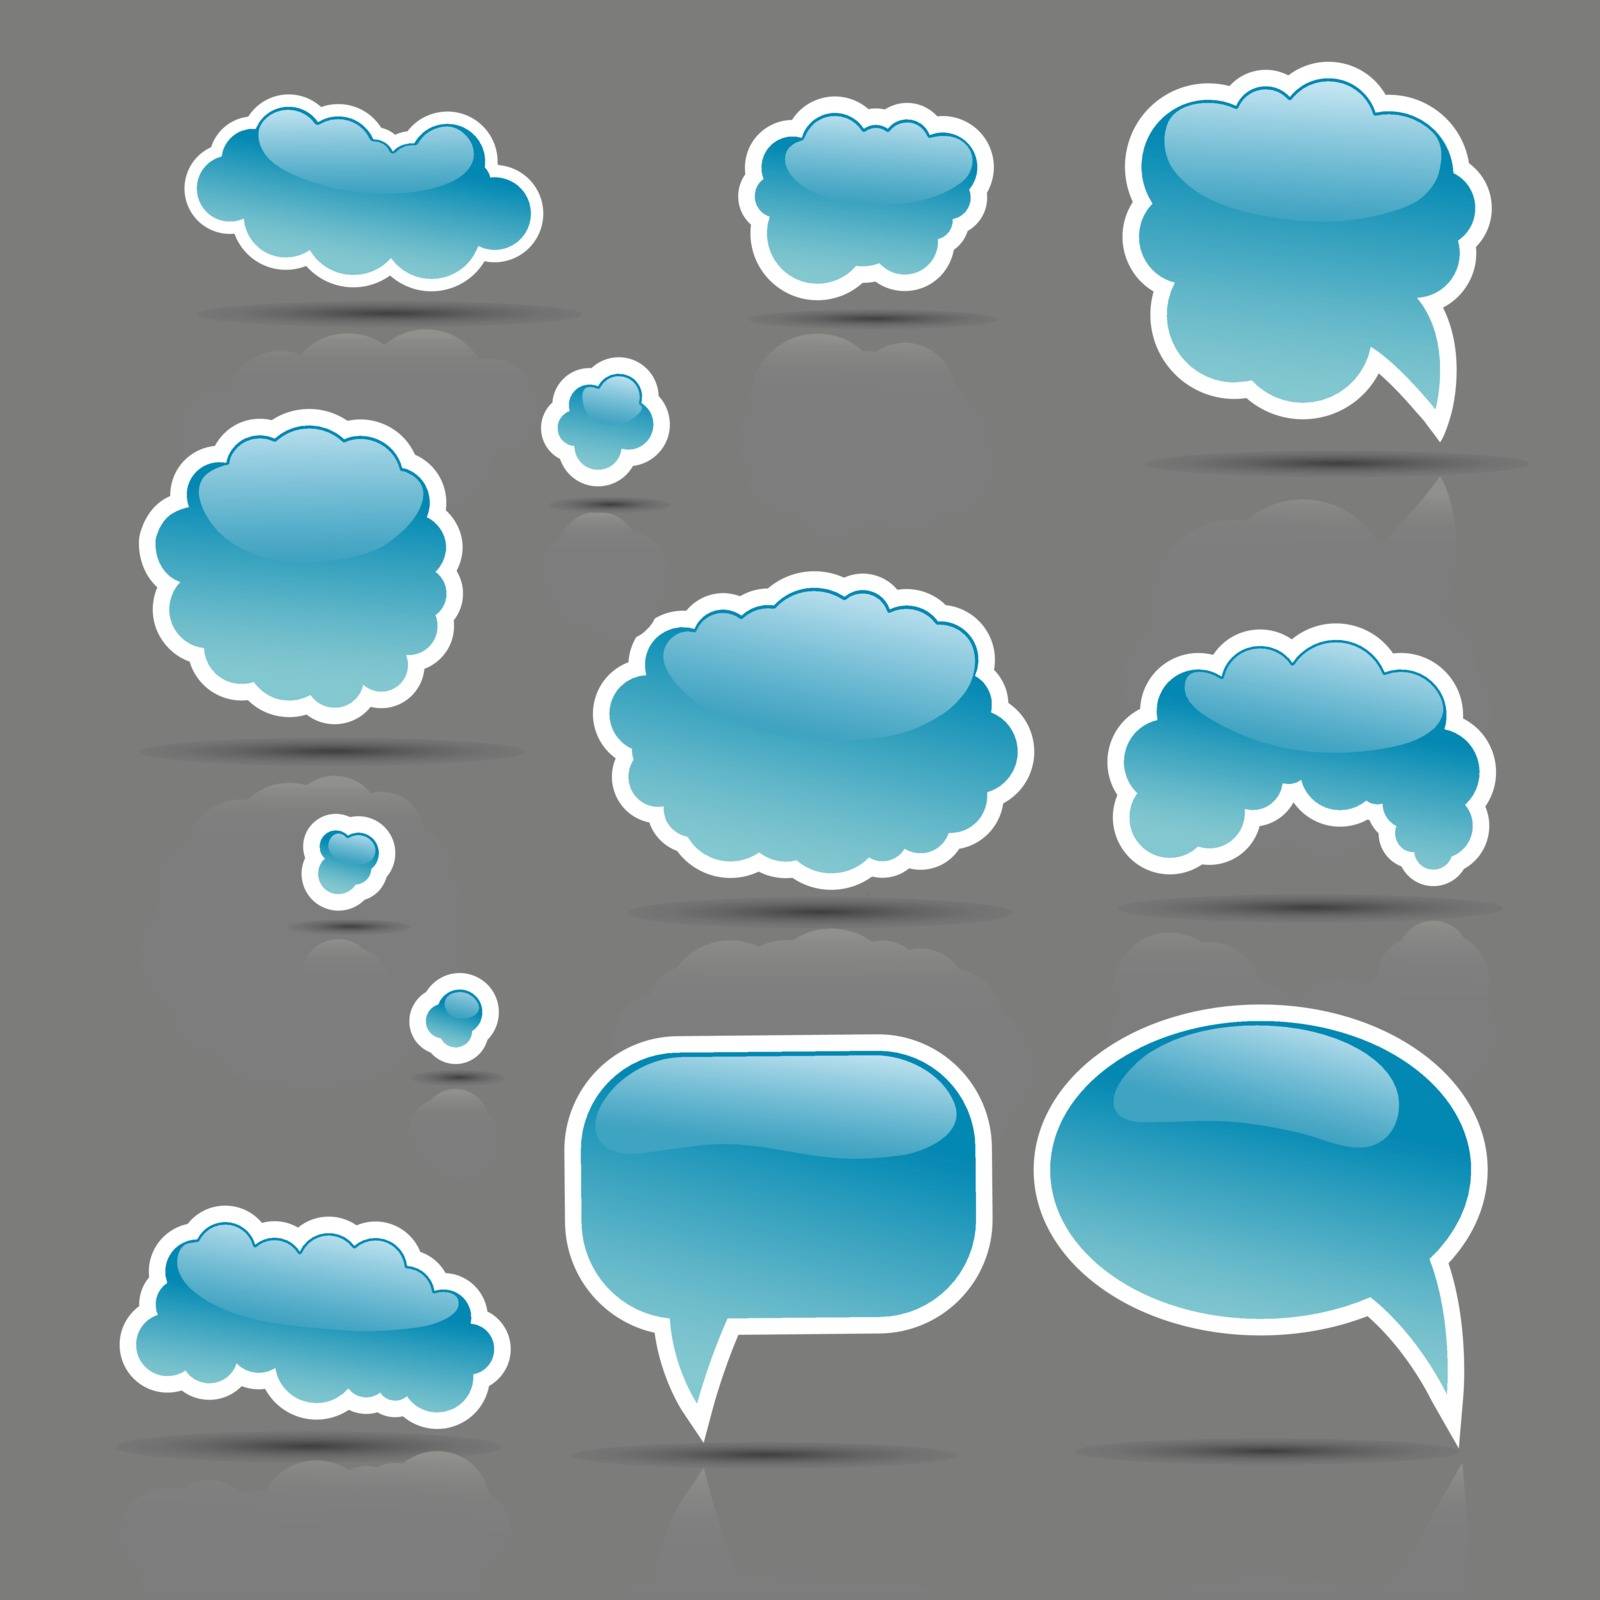 The vector set of glamour bubbles template ready for a text insert